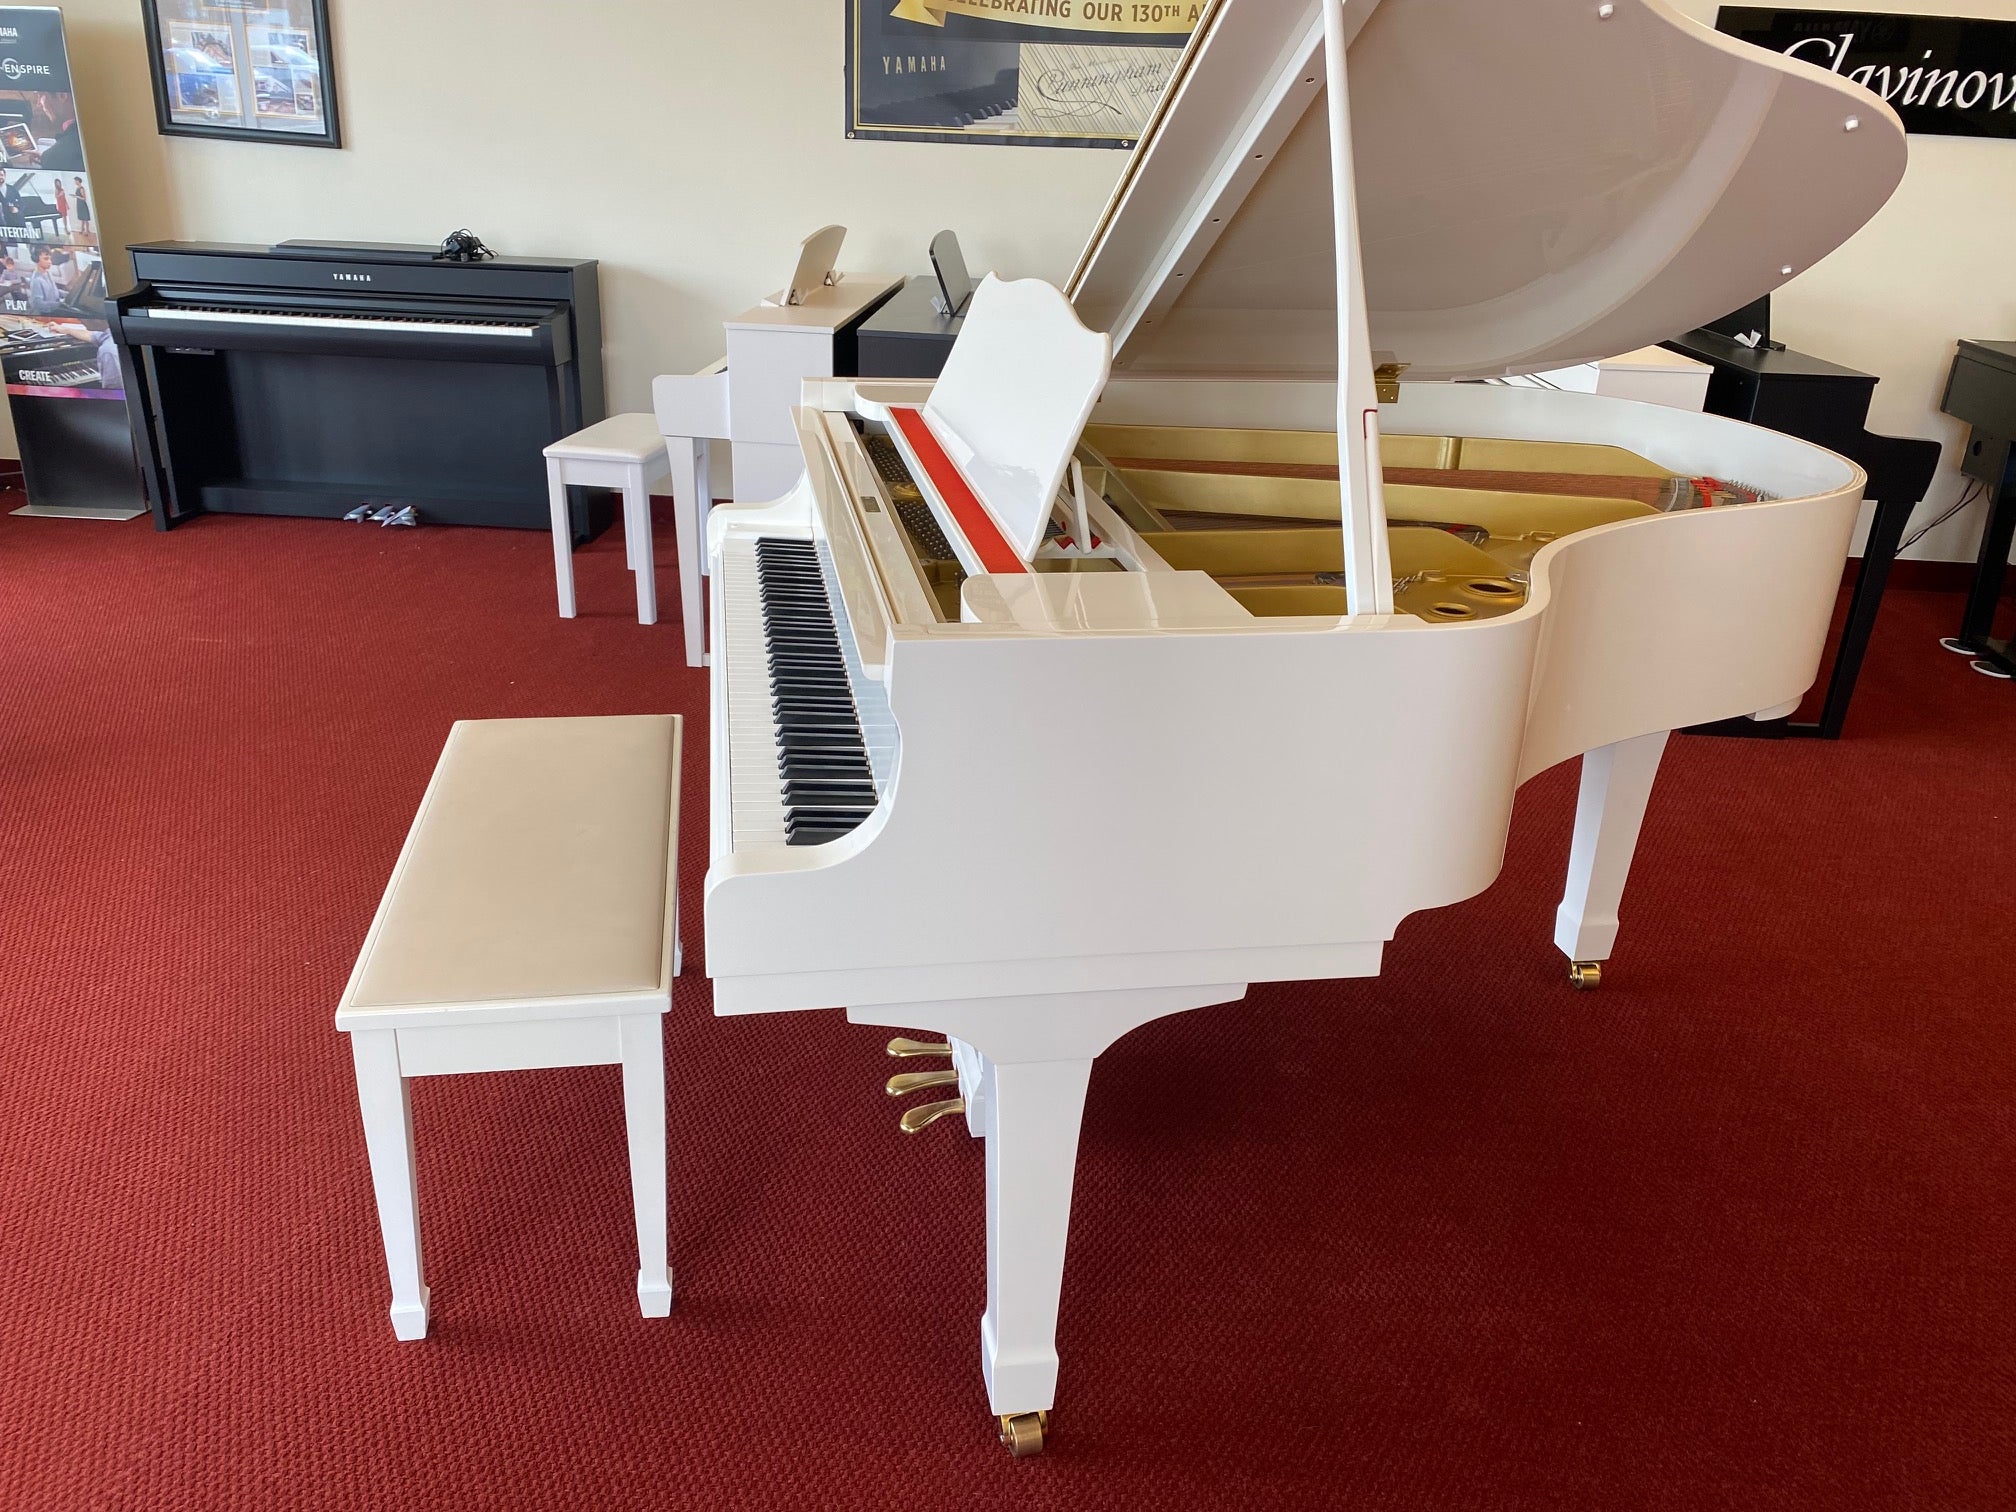 Yamaha GB1K 5' Baby Grand Piano In French Provincial Design